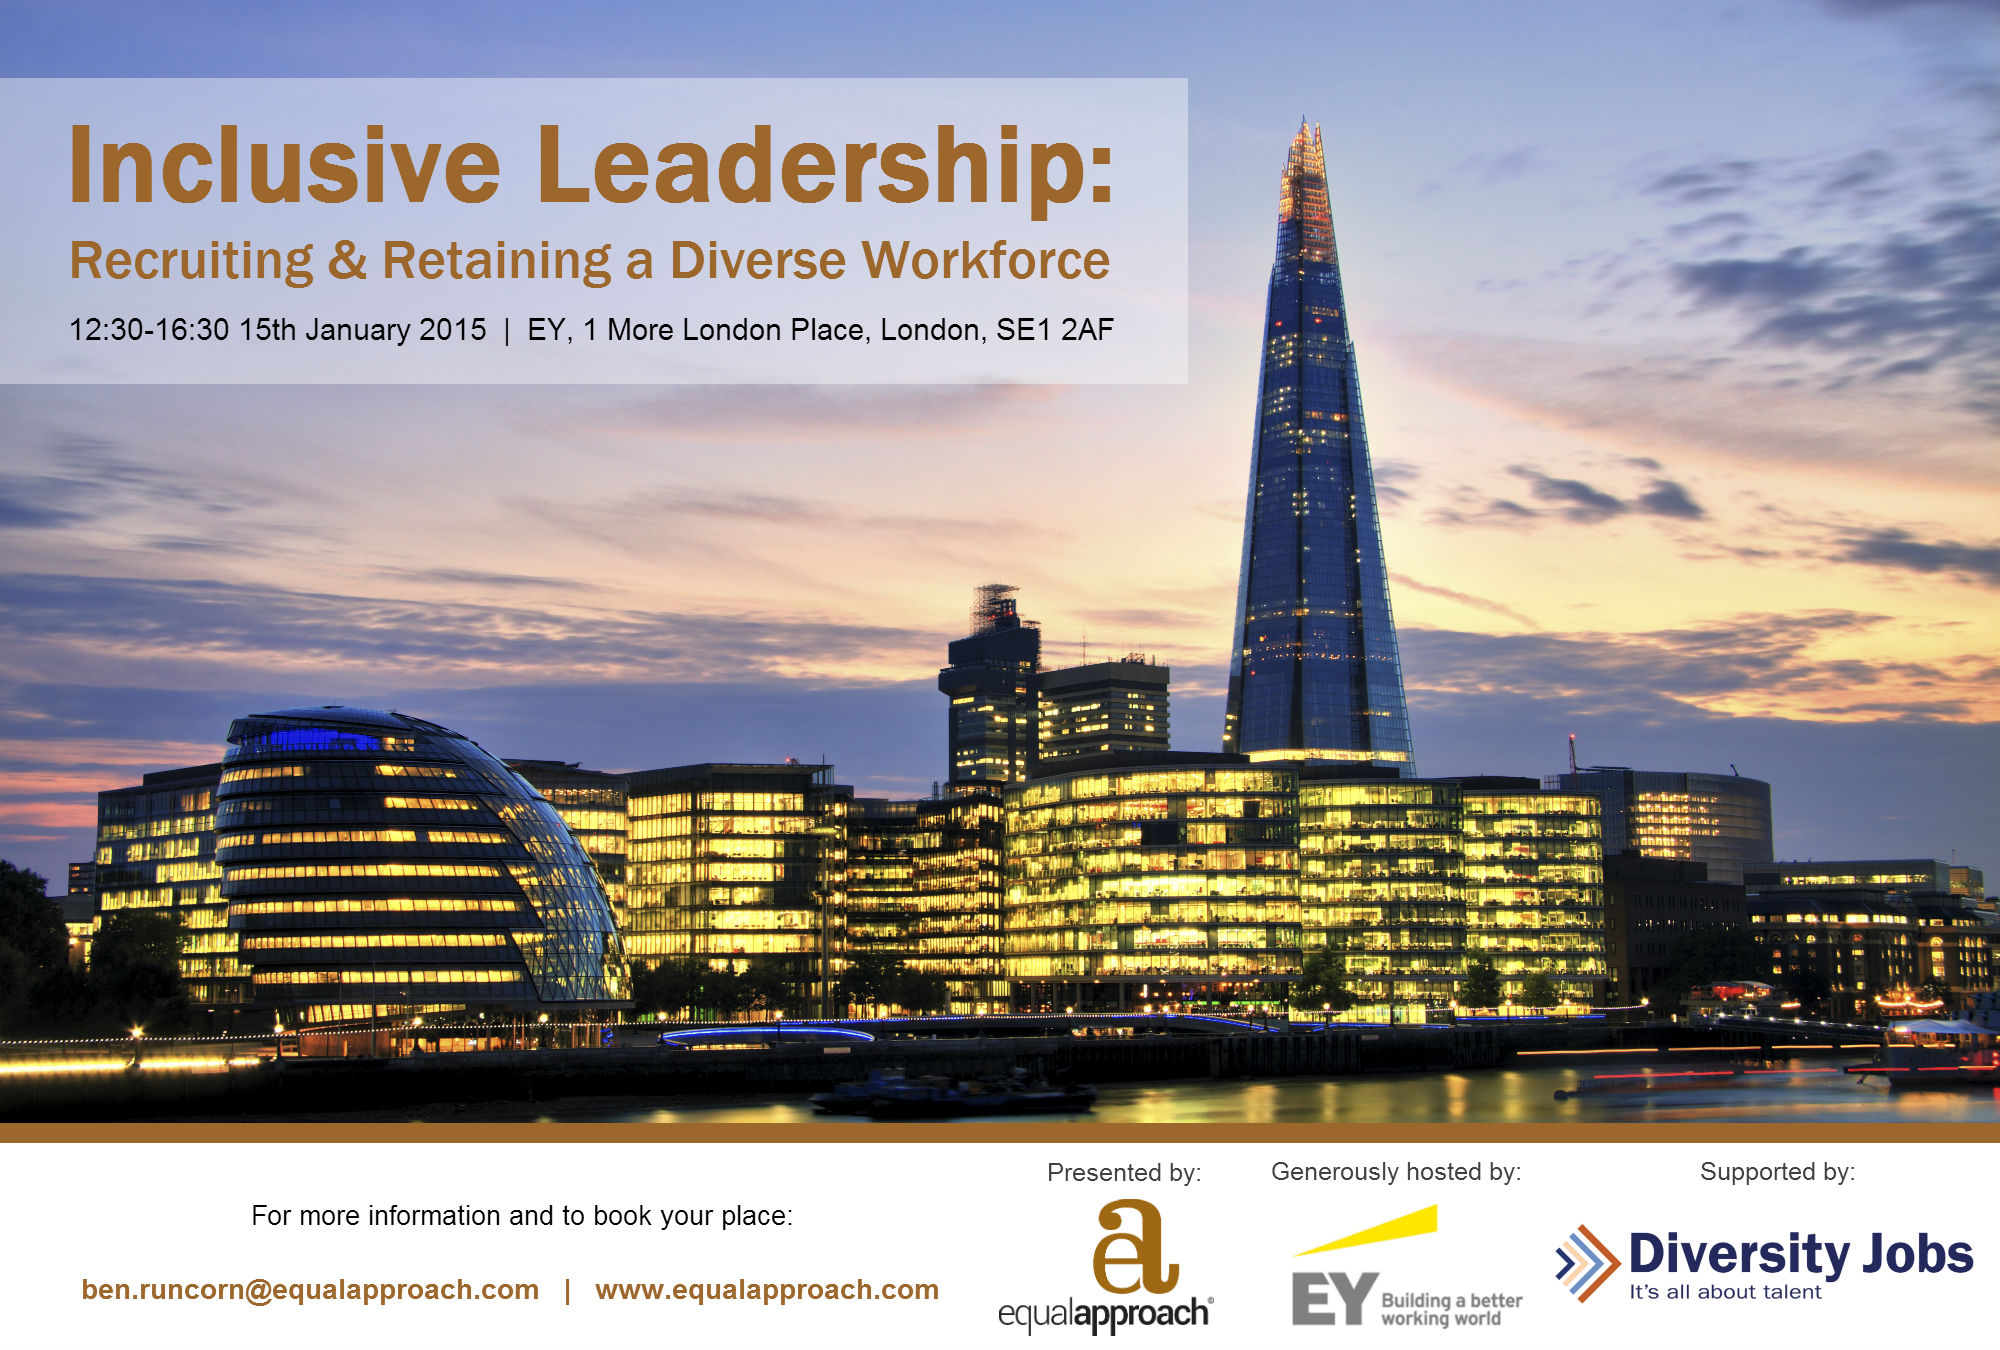 Equal Approach - Inclusive Leadership: Recruiting and Retaining a Diverse Workforce